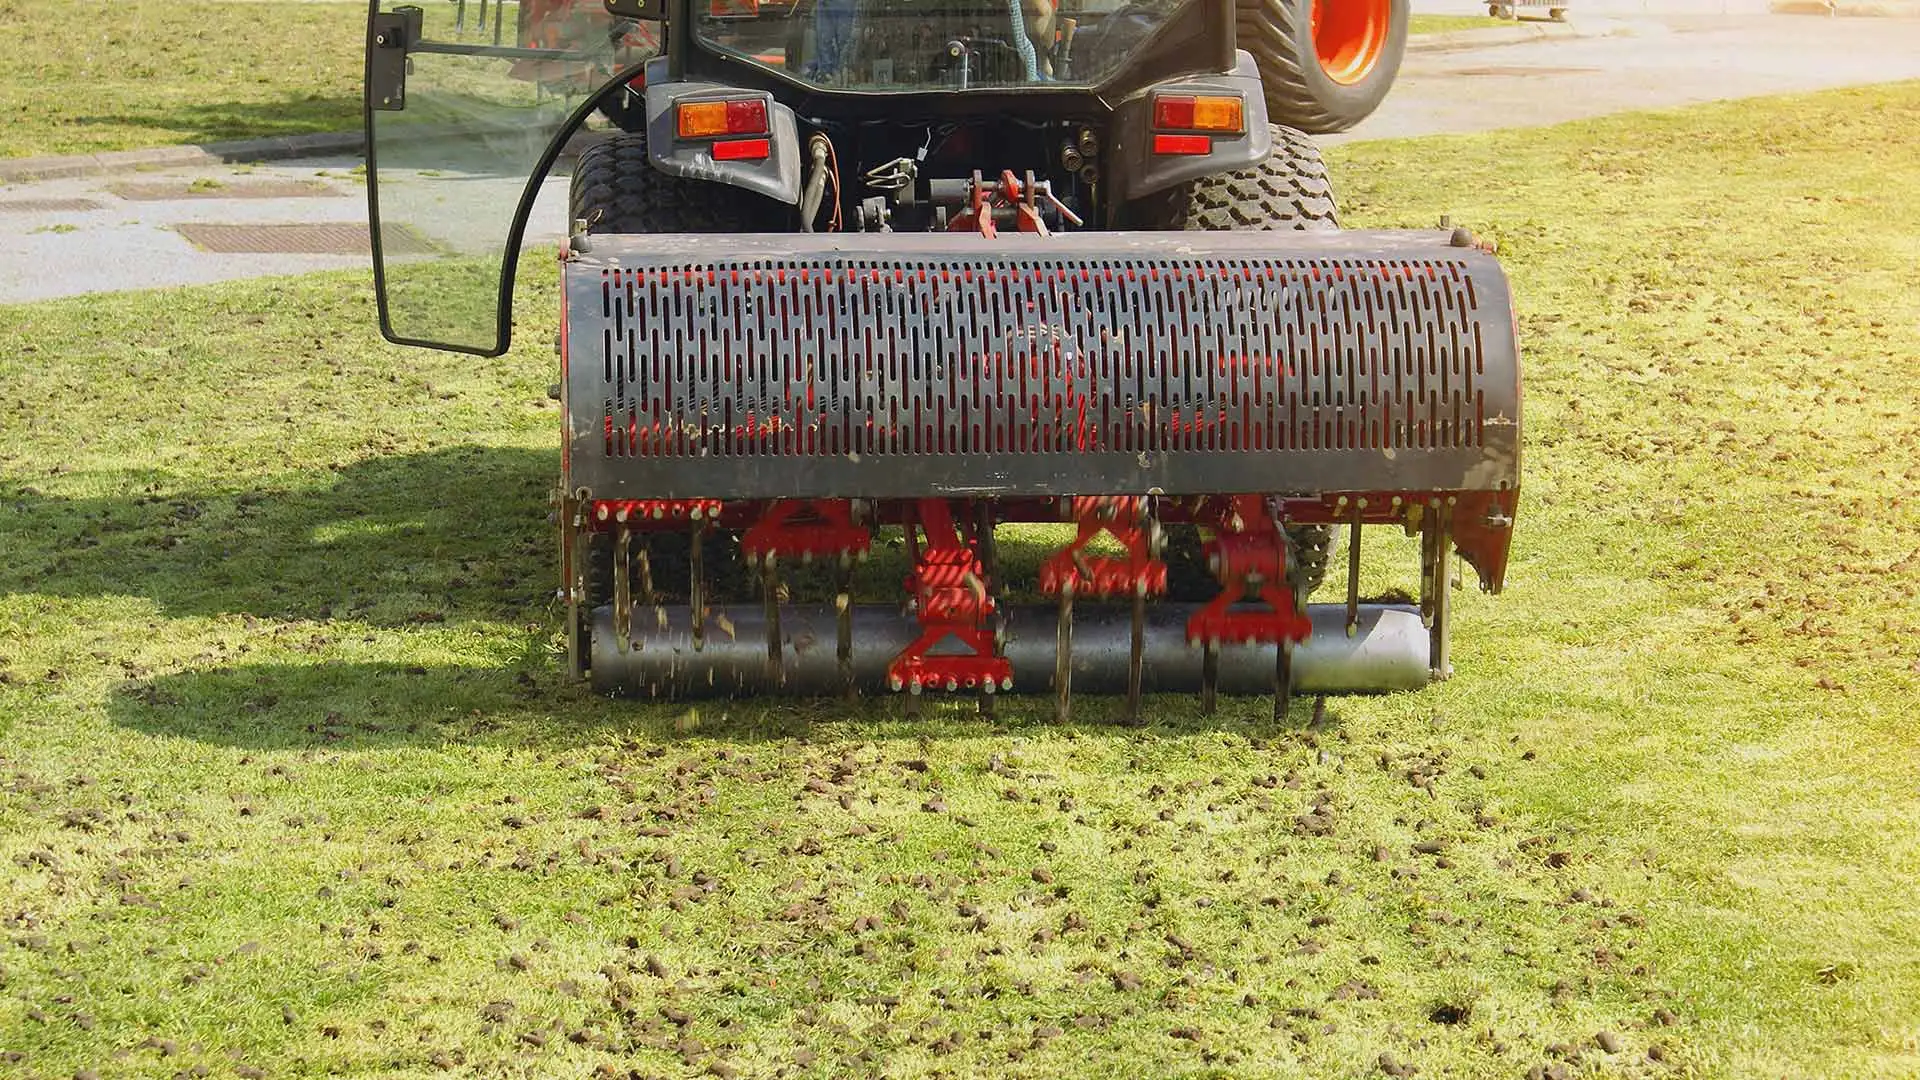 A professional is aerating a lawn using a large aearation vehicle.